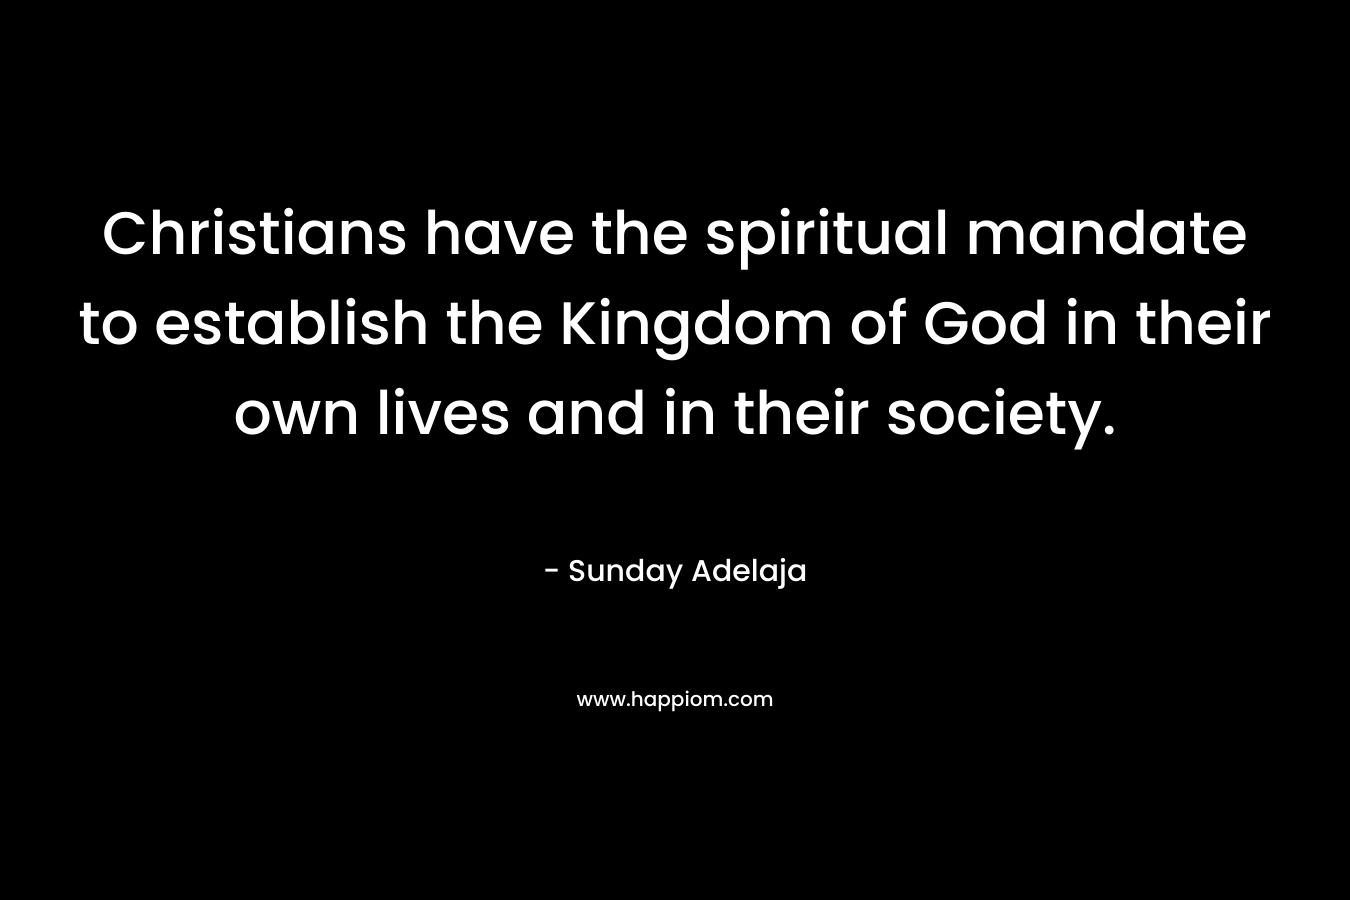 Christians have the spiritual mandate to establish the Kingdom of God in their own lives and in their society.